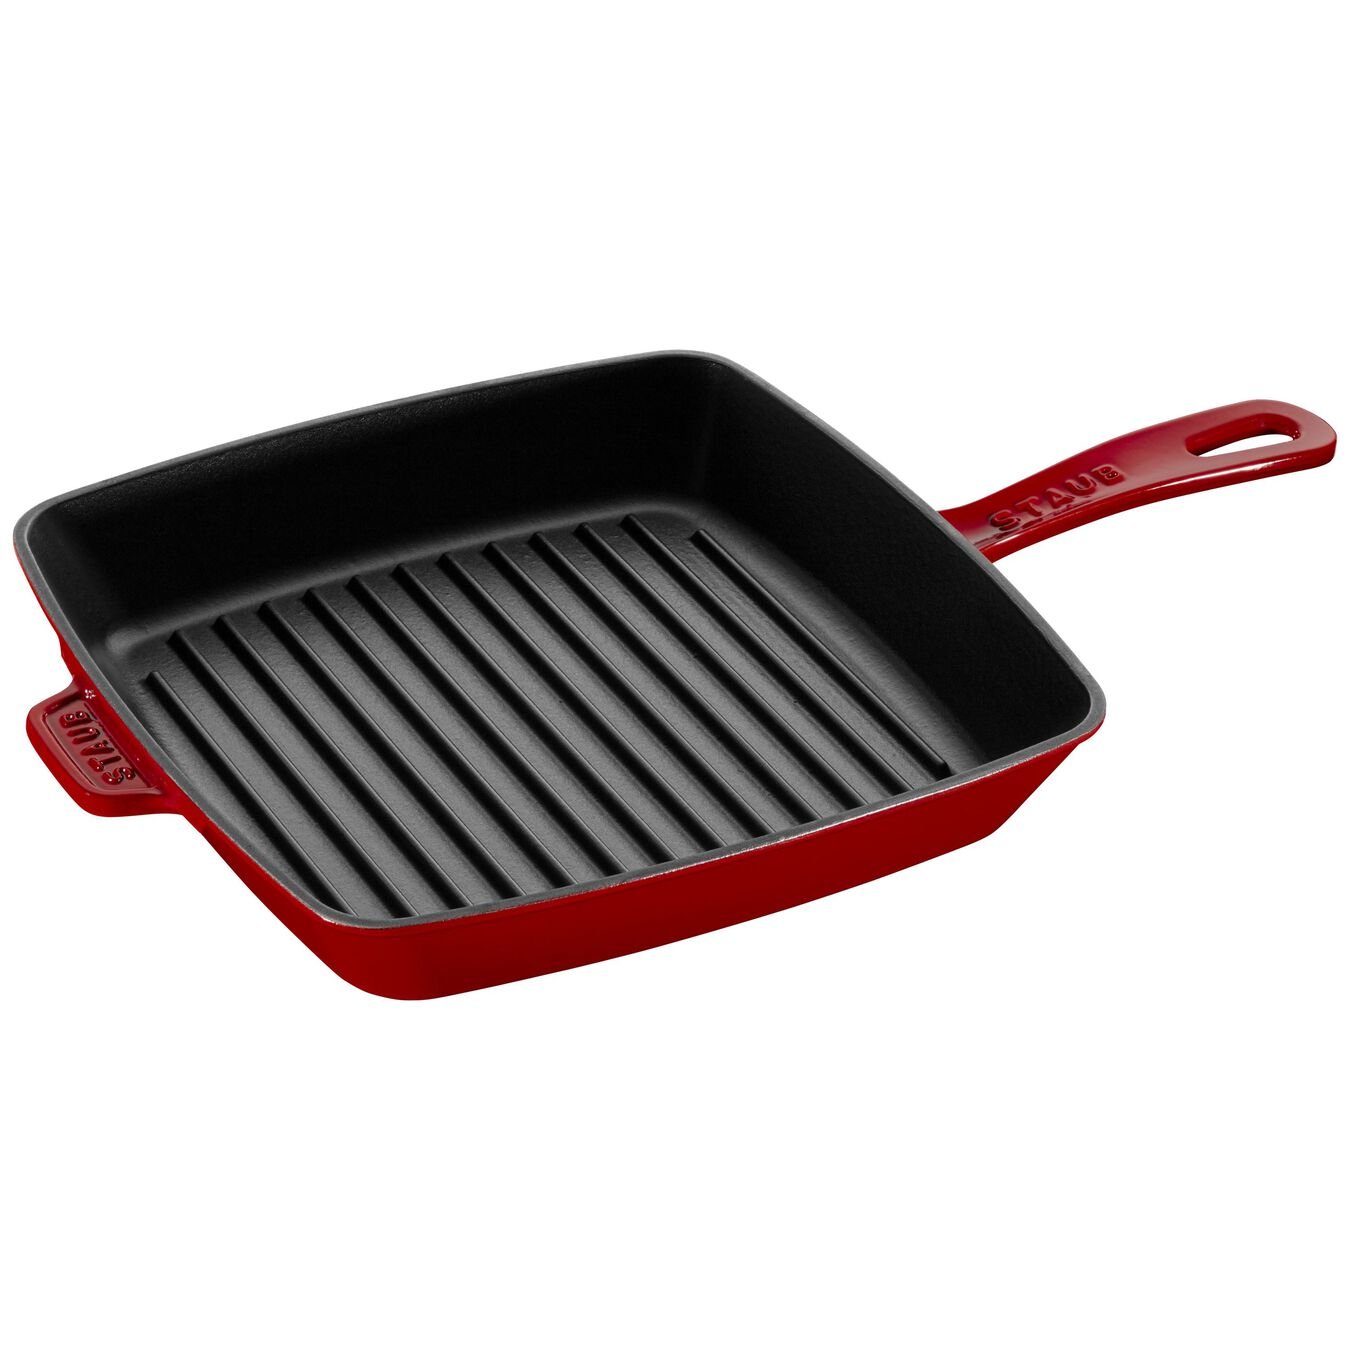 26 cm cast iron square American grill, cherry,,large 1